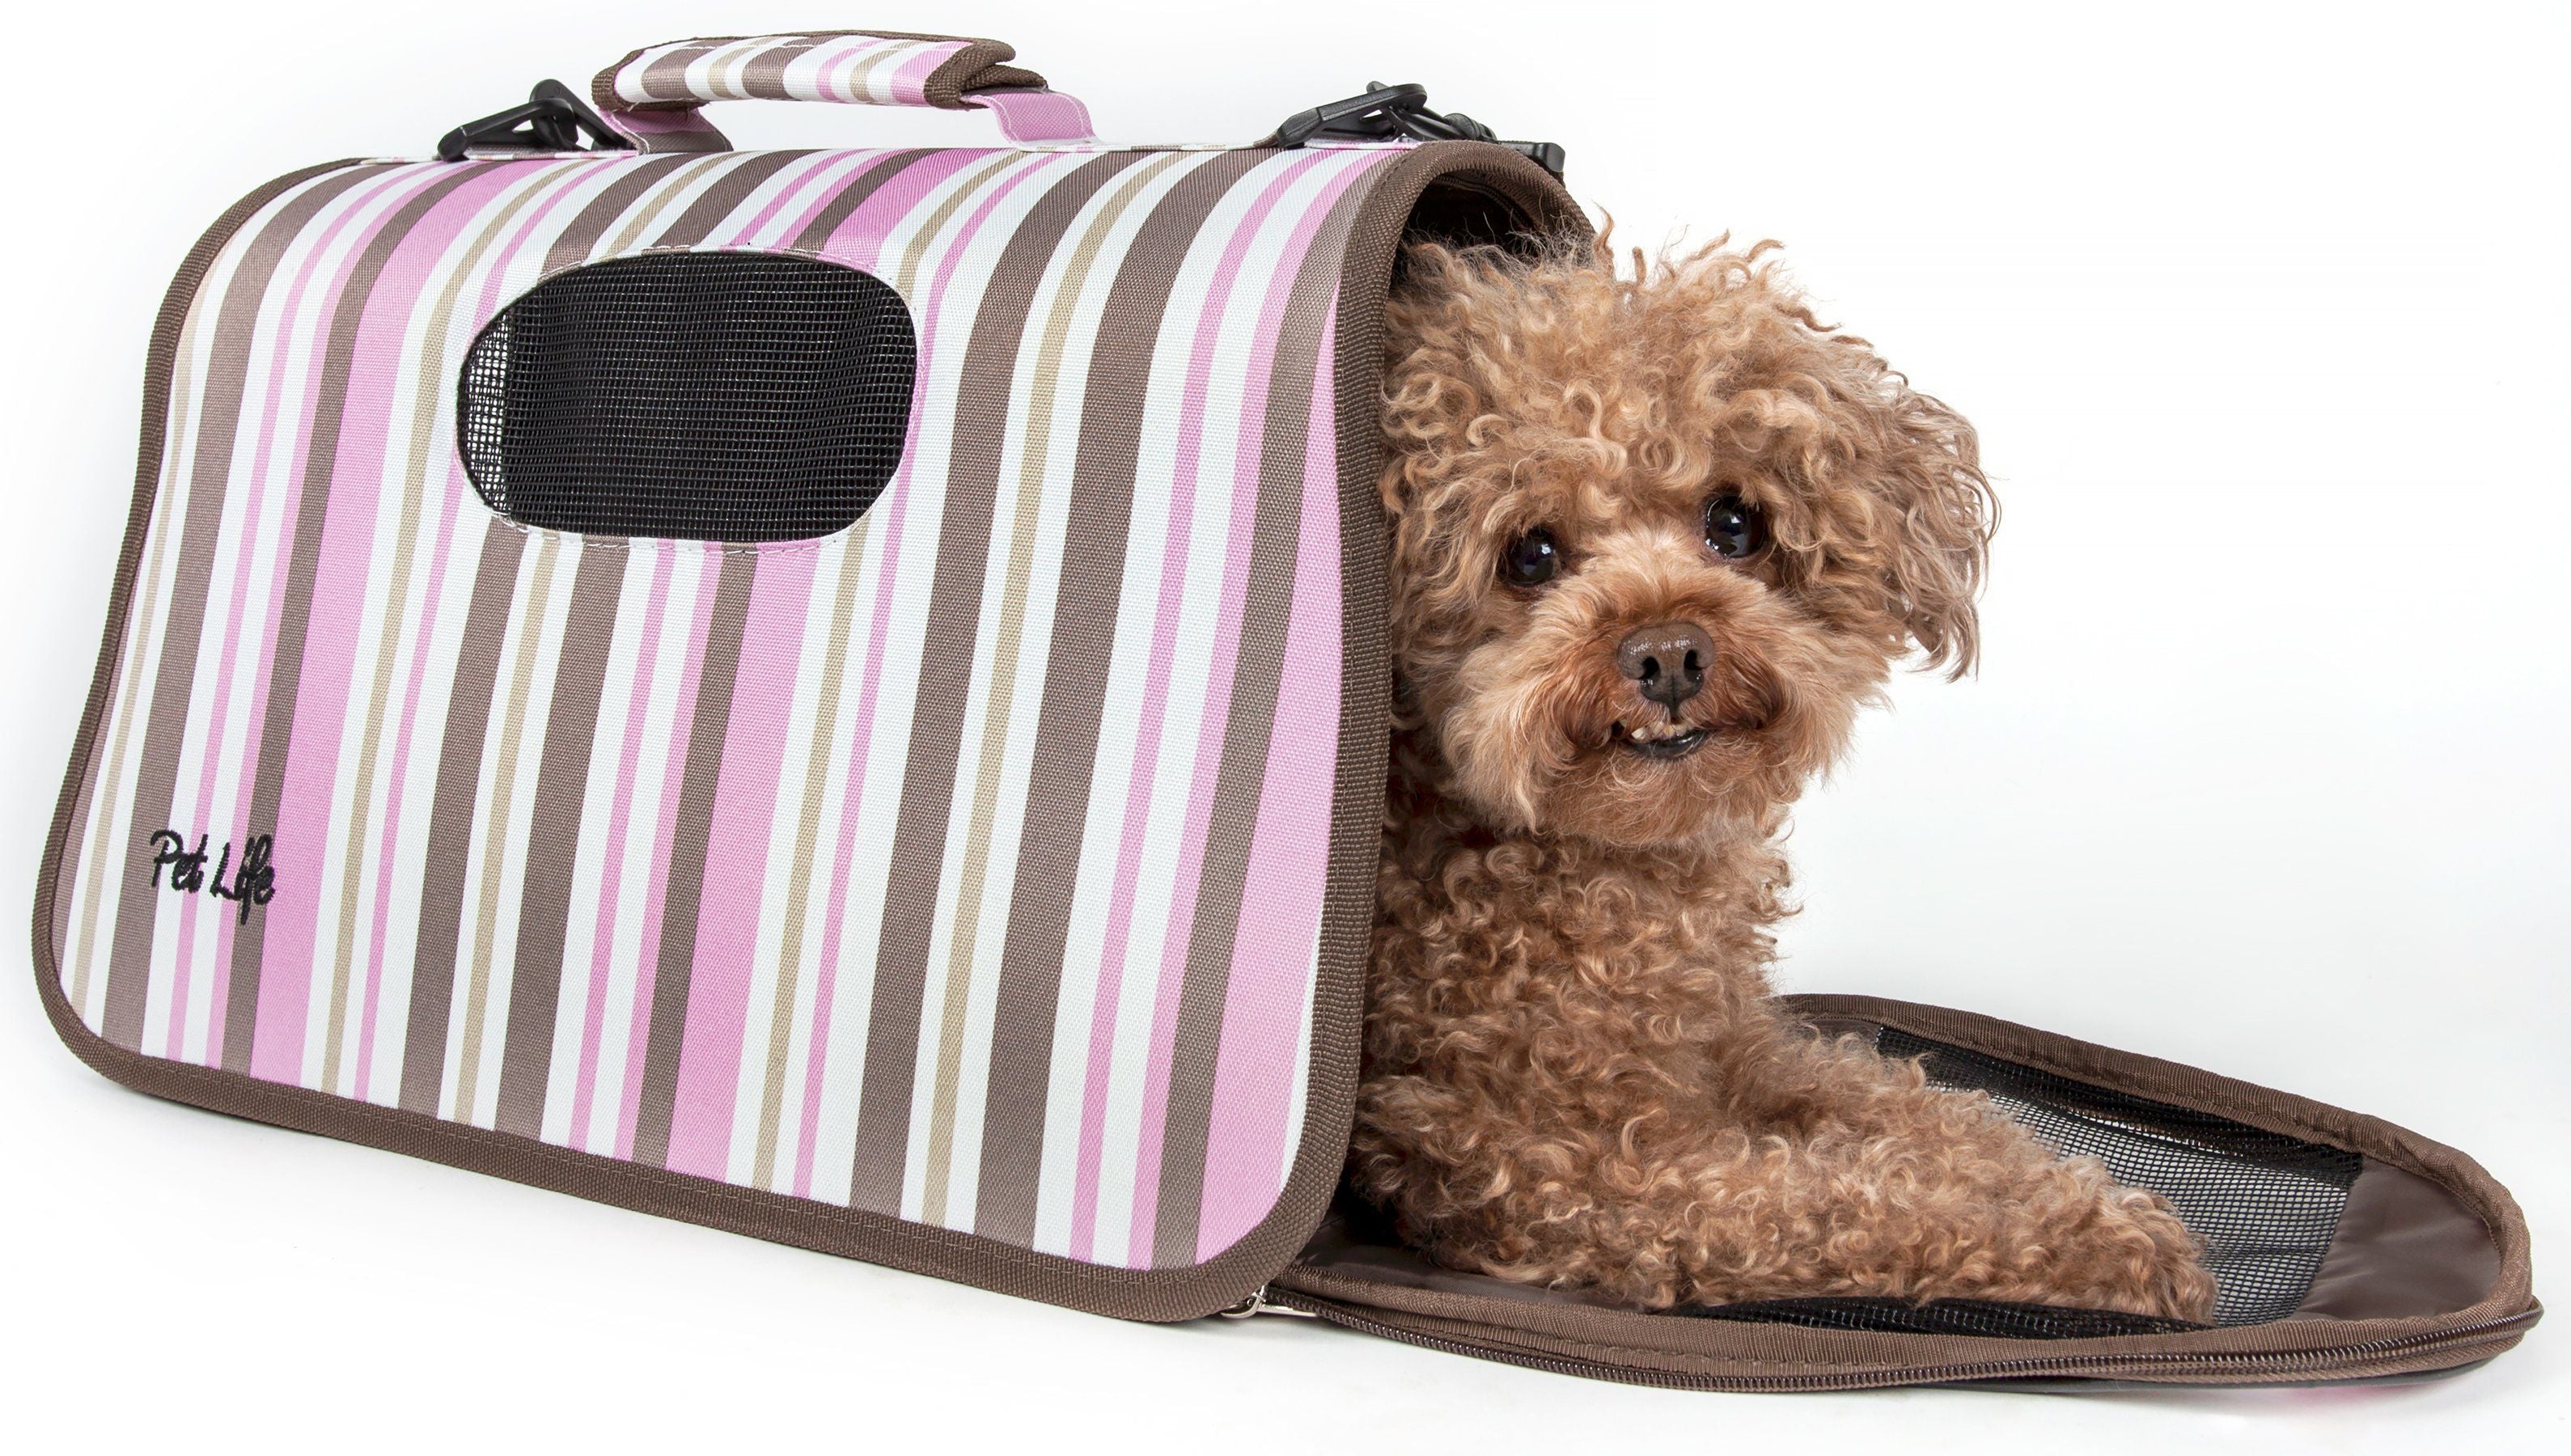 Pet Life ® Paw Patterned Airline Approved Zippered Folding Collapsible Travel Pet Dog Carrier Medium Multi-Color